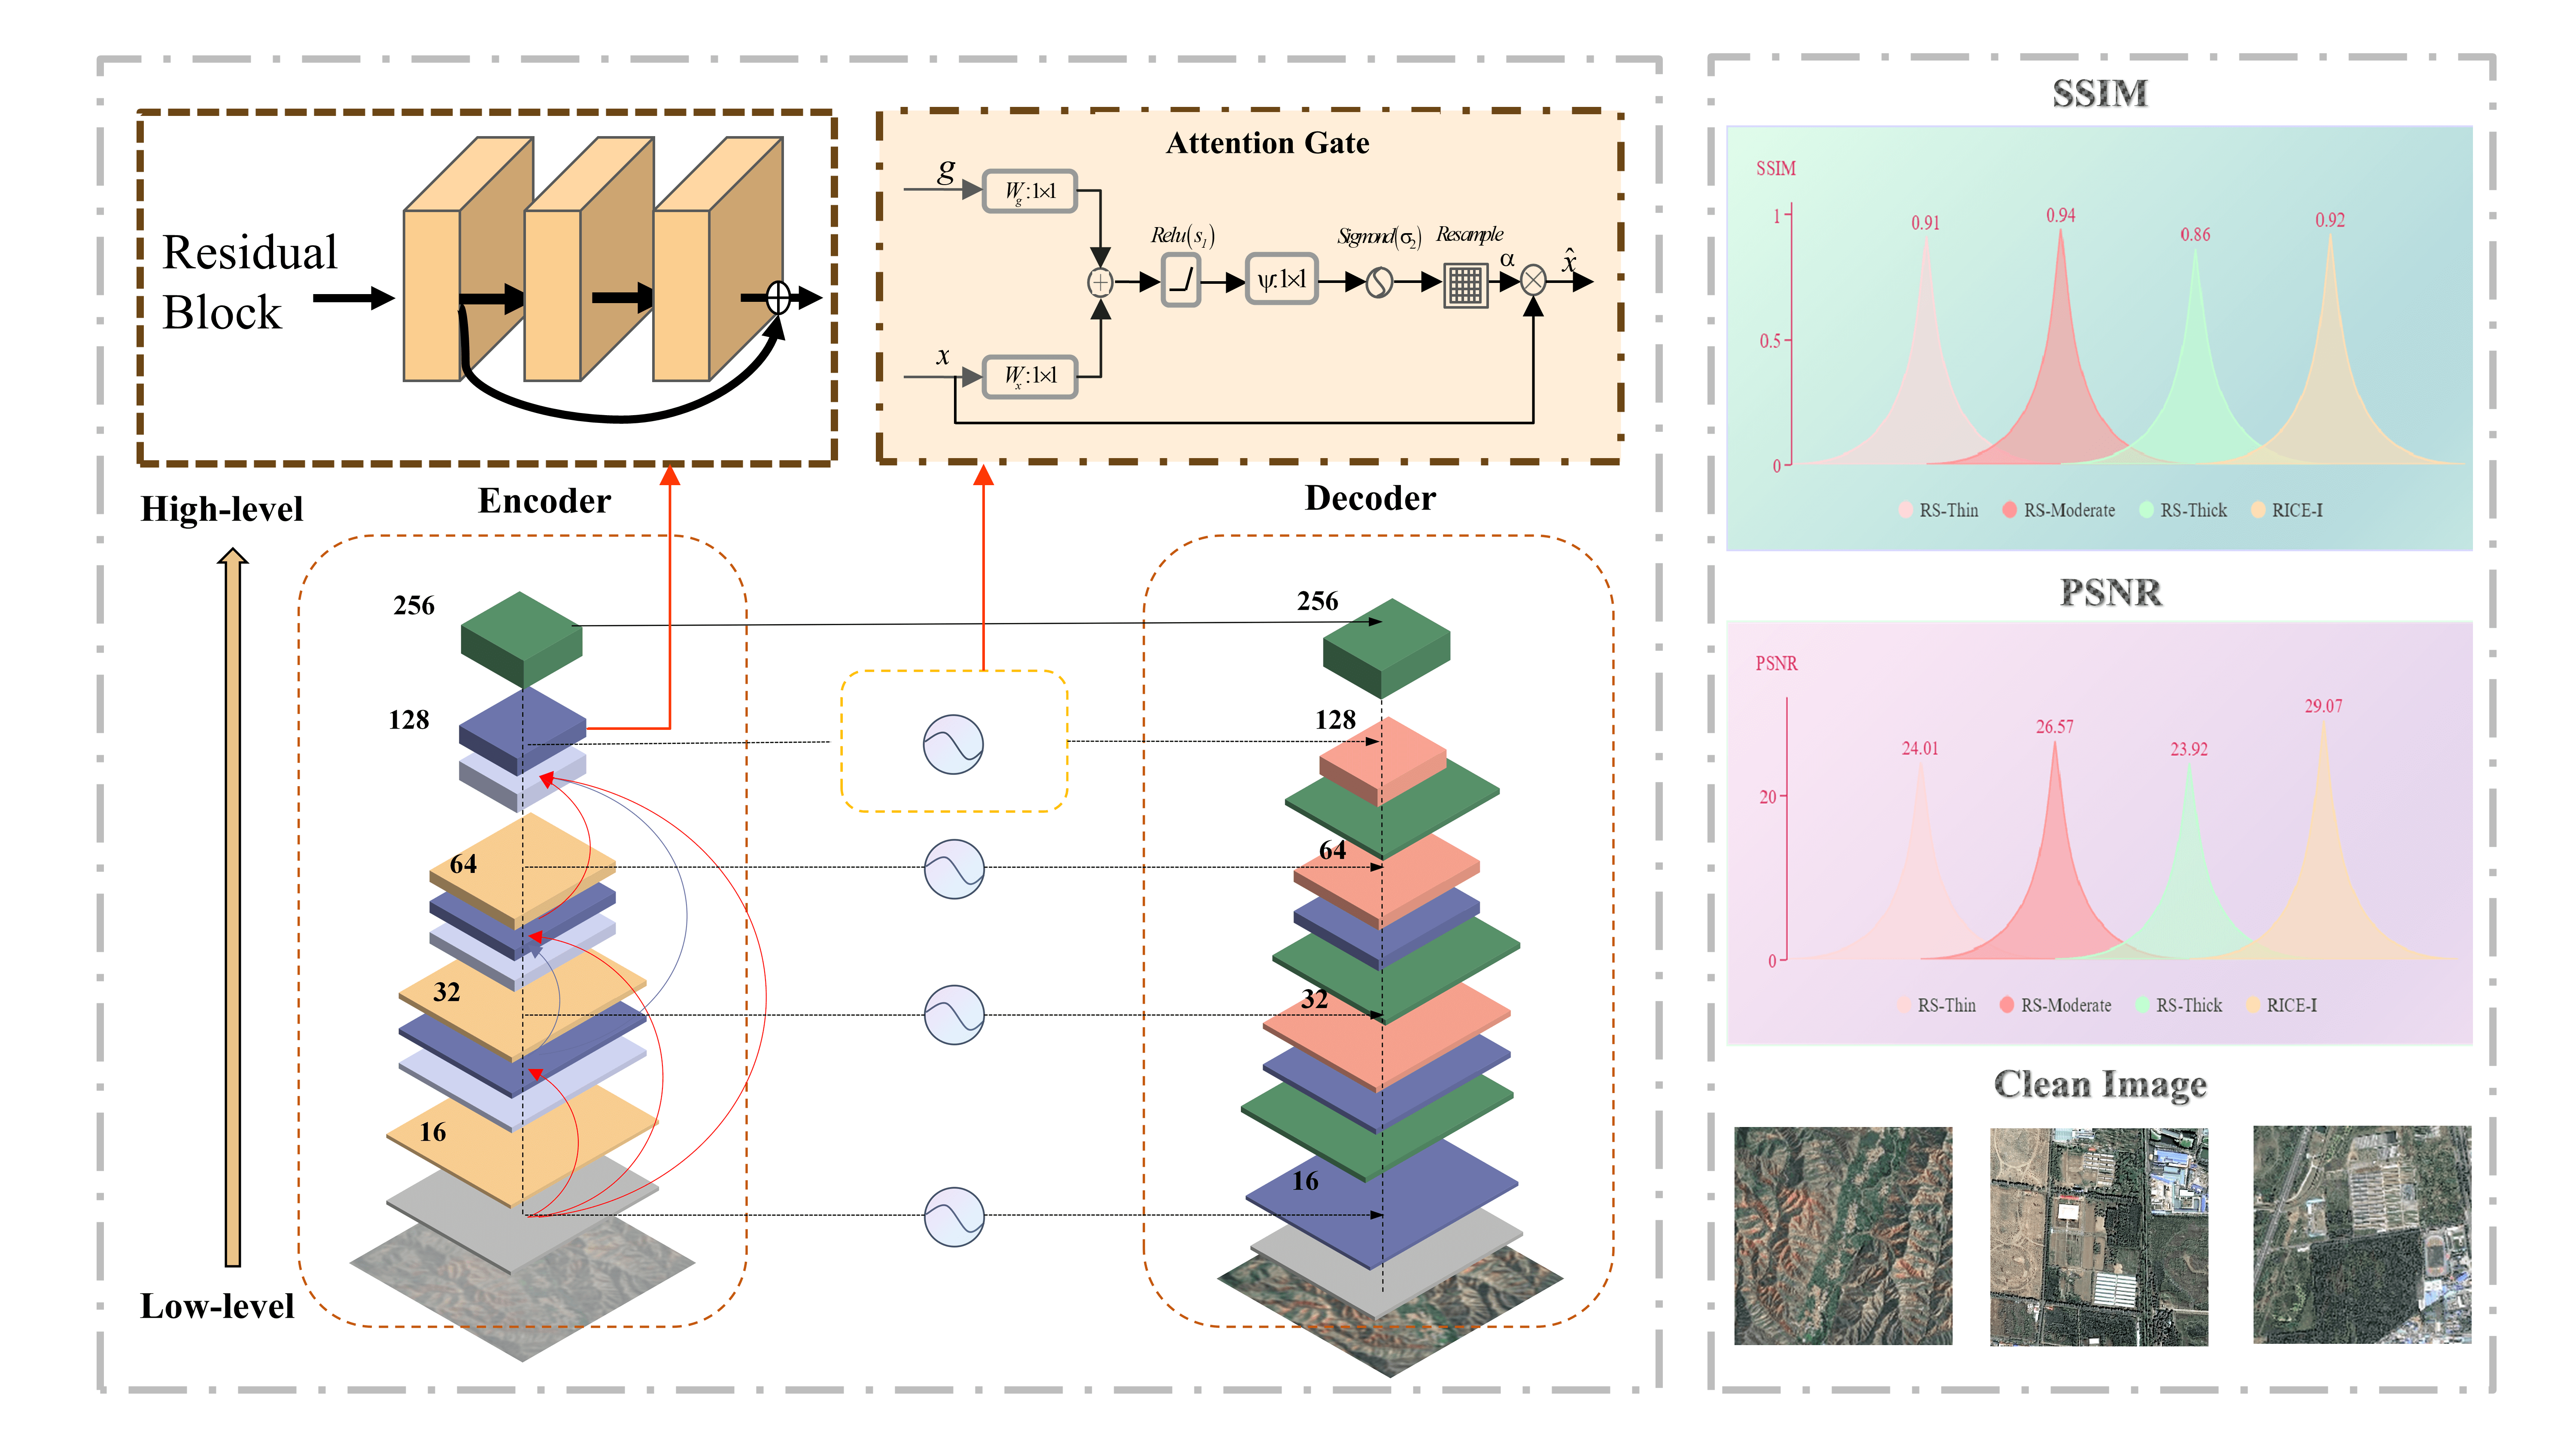 Advancements in Remote Sensing Image Dehazing: Introducing URA-Net with Multi-Scale Dense Feature Fusion Clusters and Gated Jump Connection